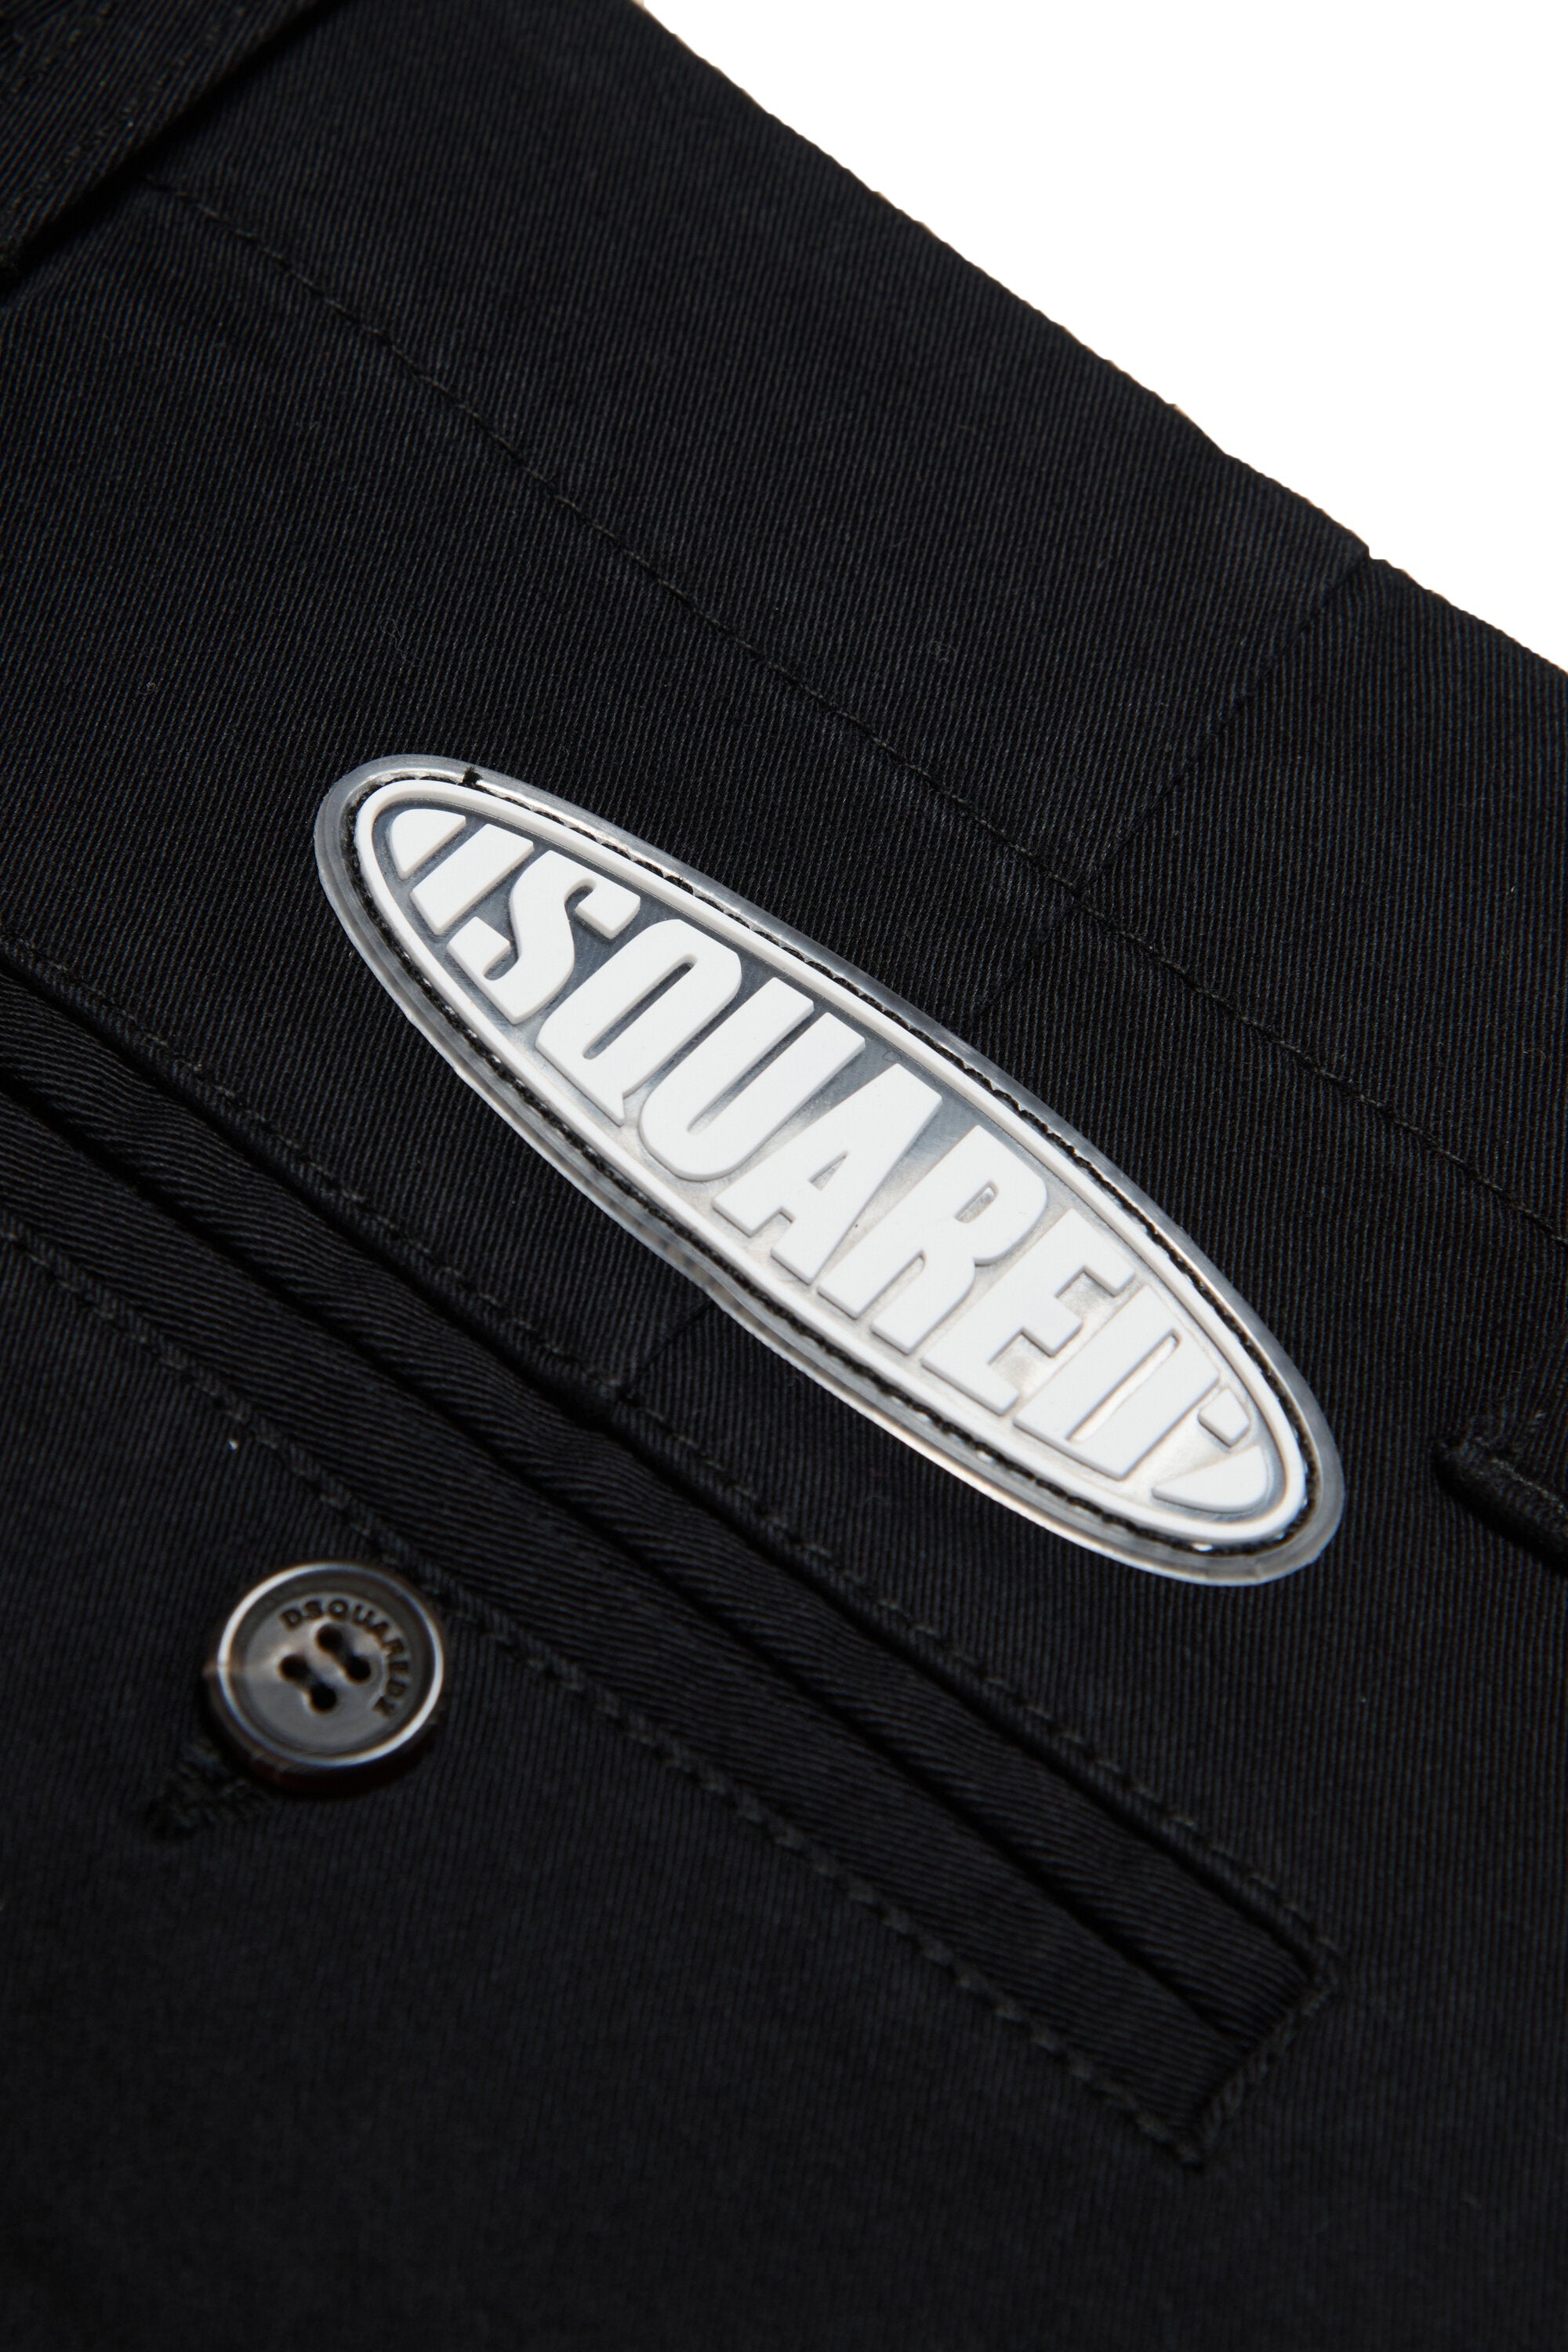 Gabardine shorts branded with surf logo patch